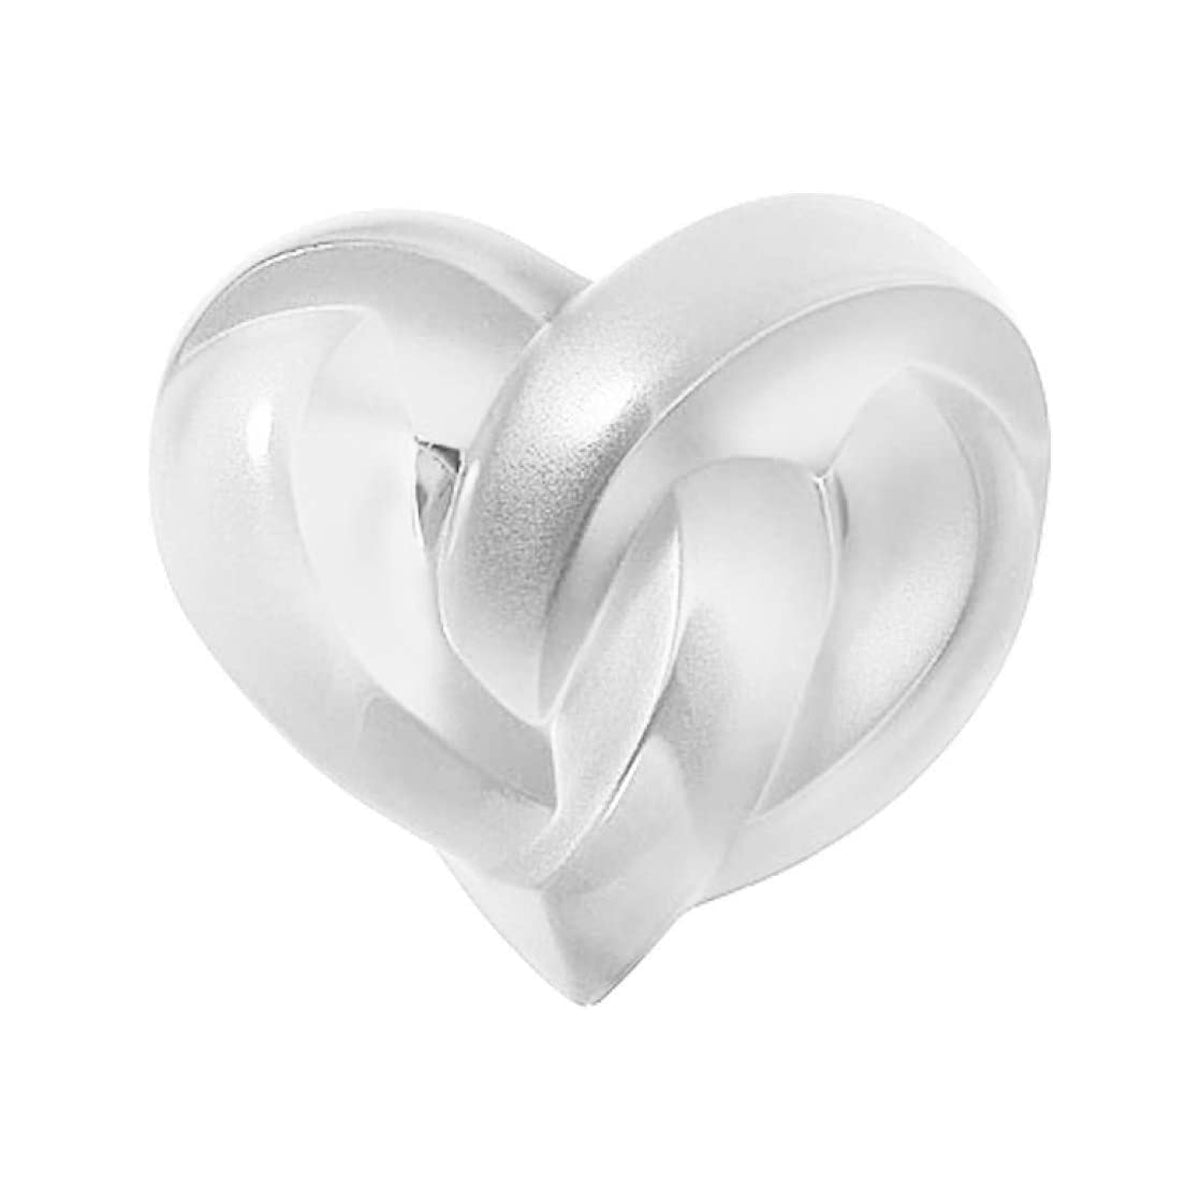 Lalique Heart Paperweight